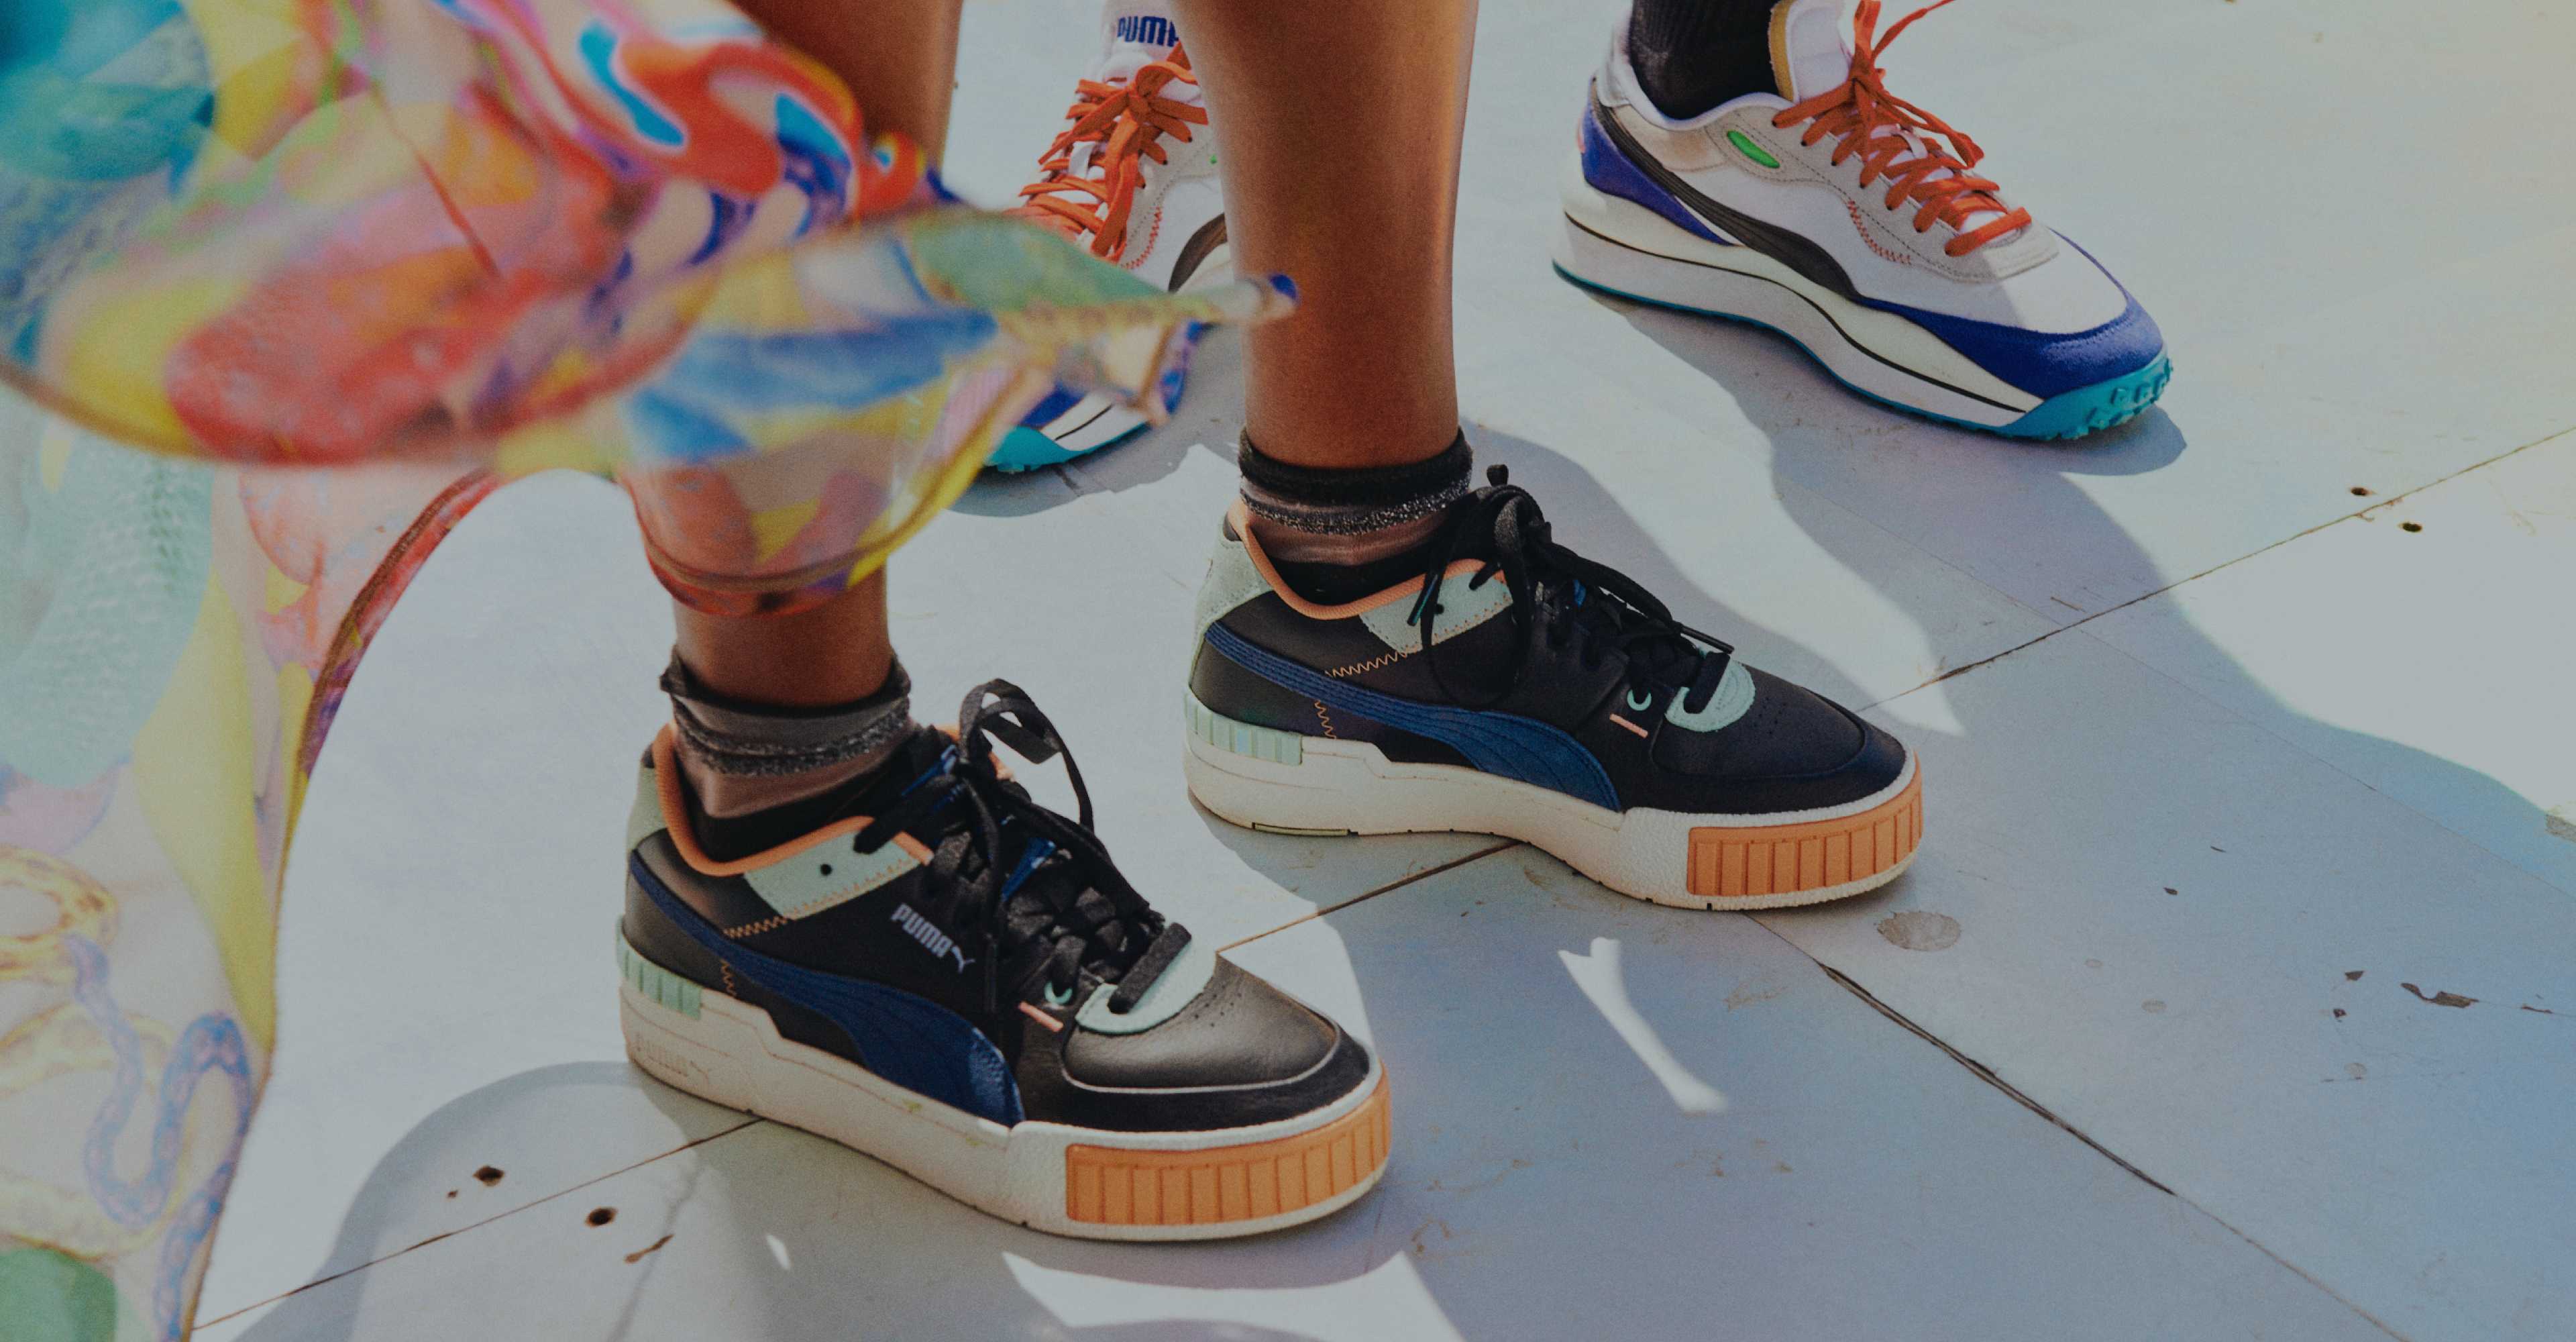 A California-inspired block party for a legendary footwear brand